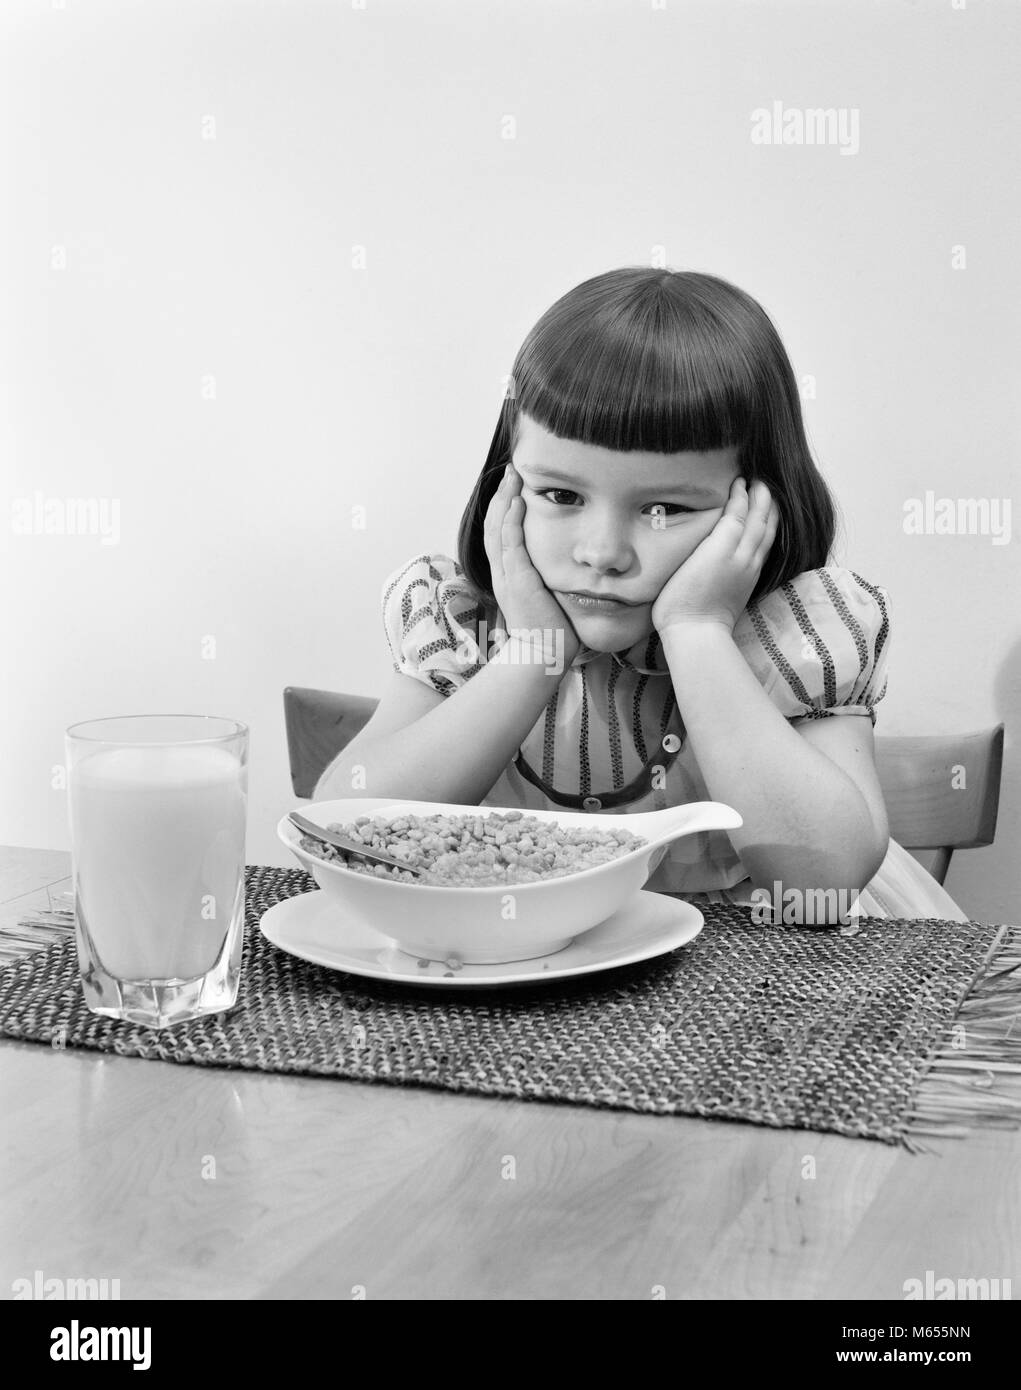 1950s GRUMPY GIRL SITTING AT TABLE WITH BOWL OF CEREAL GLASS OF MILK LEANING CHIN ON HANDS - asp x16630 CAM001 HARS INDOORS NOSTALGIA SADNESS EYE CONTACT 3-4 YEARS BRUNETTE 5-6 YEARS AILING JUVENILES MISERABLE AVERSION B&W BANGS BLACK AND WHITE CAUCASIAN ETHNICITY DISLIKE DISPLEASED HATE OLD FASHIONED UNAPPETIZING UNHAPPINESS UNWELL Stock Photo